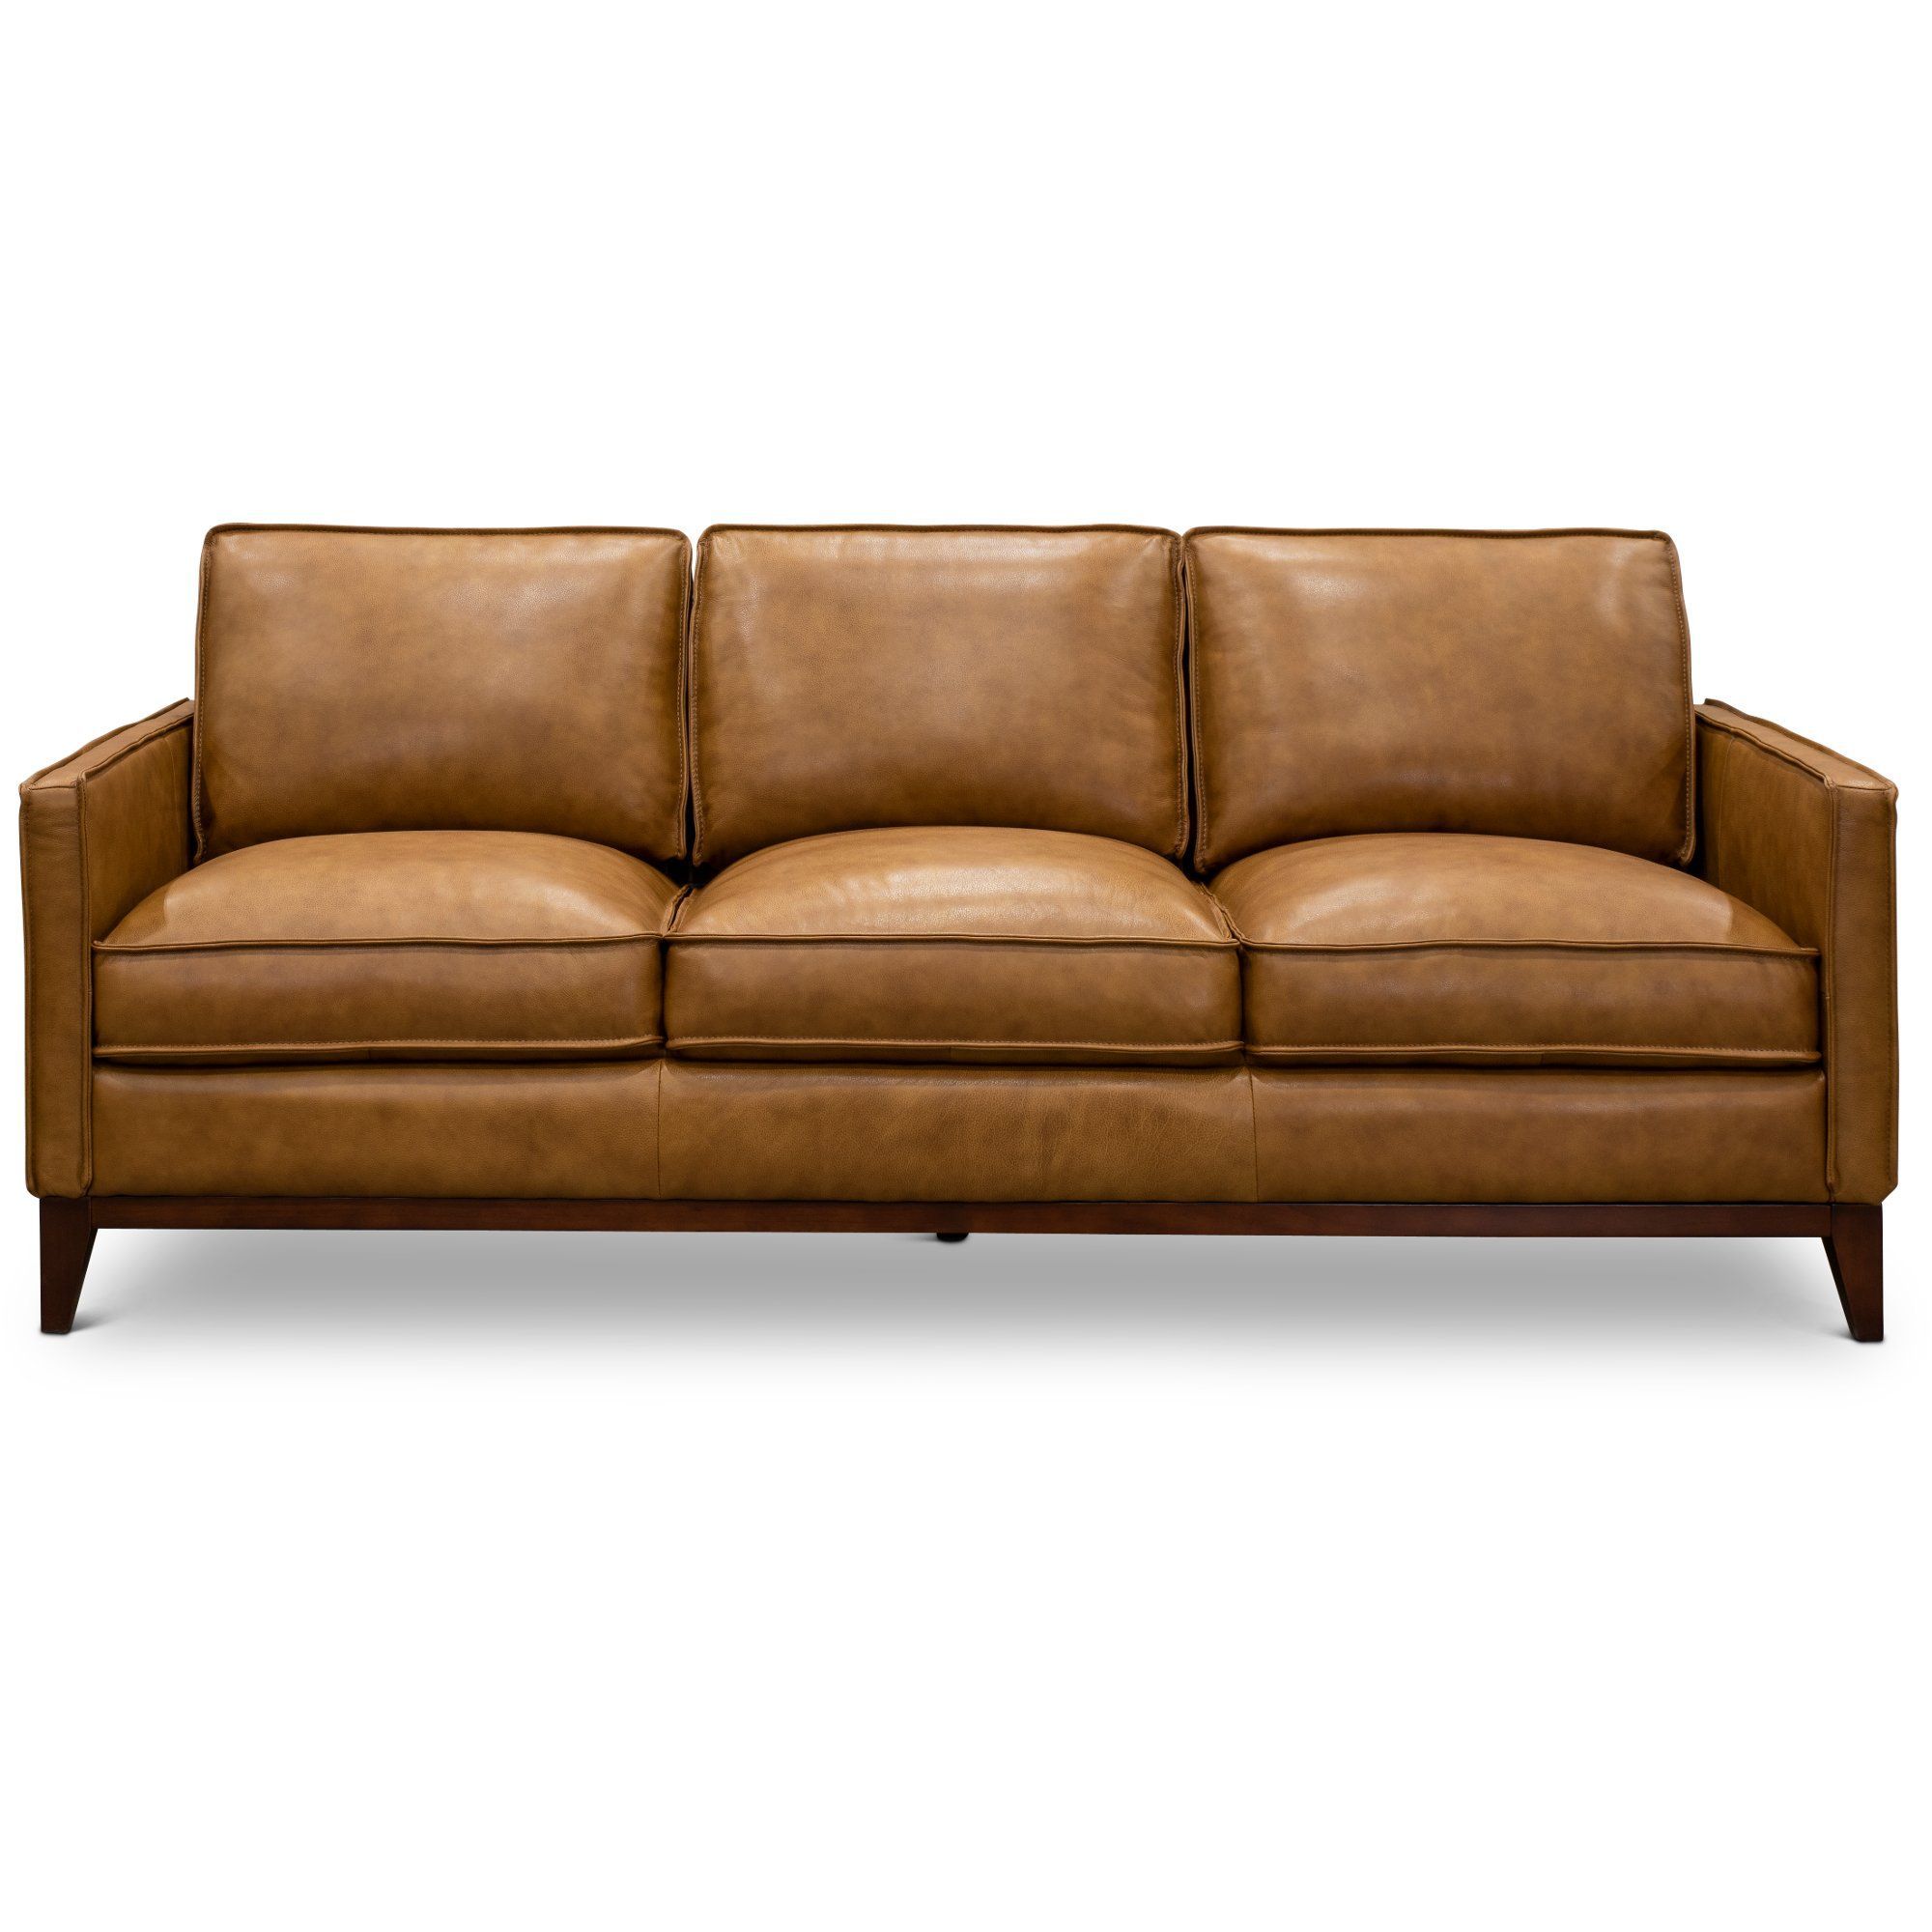 Mid Century Modern Camel Brown Leather Sofa – Newport – Dekorationcity In Mid Century Modern Sofas (Gallery 13 of 20)